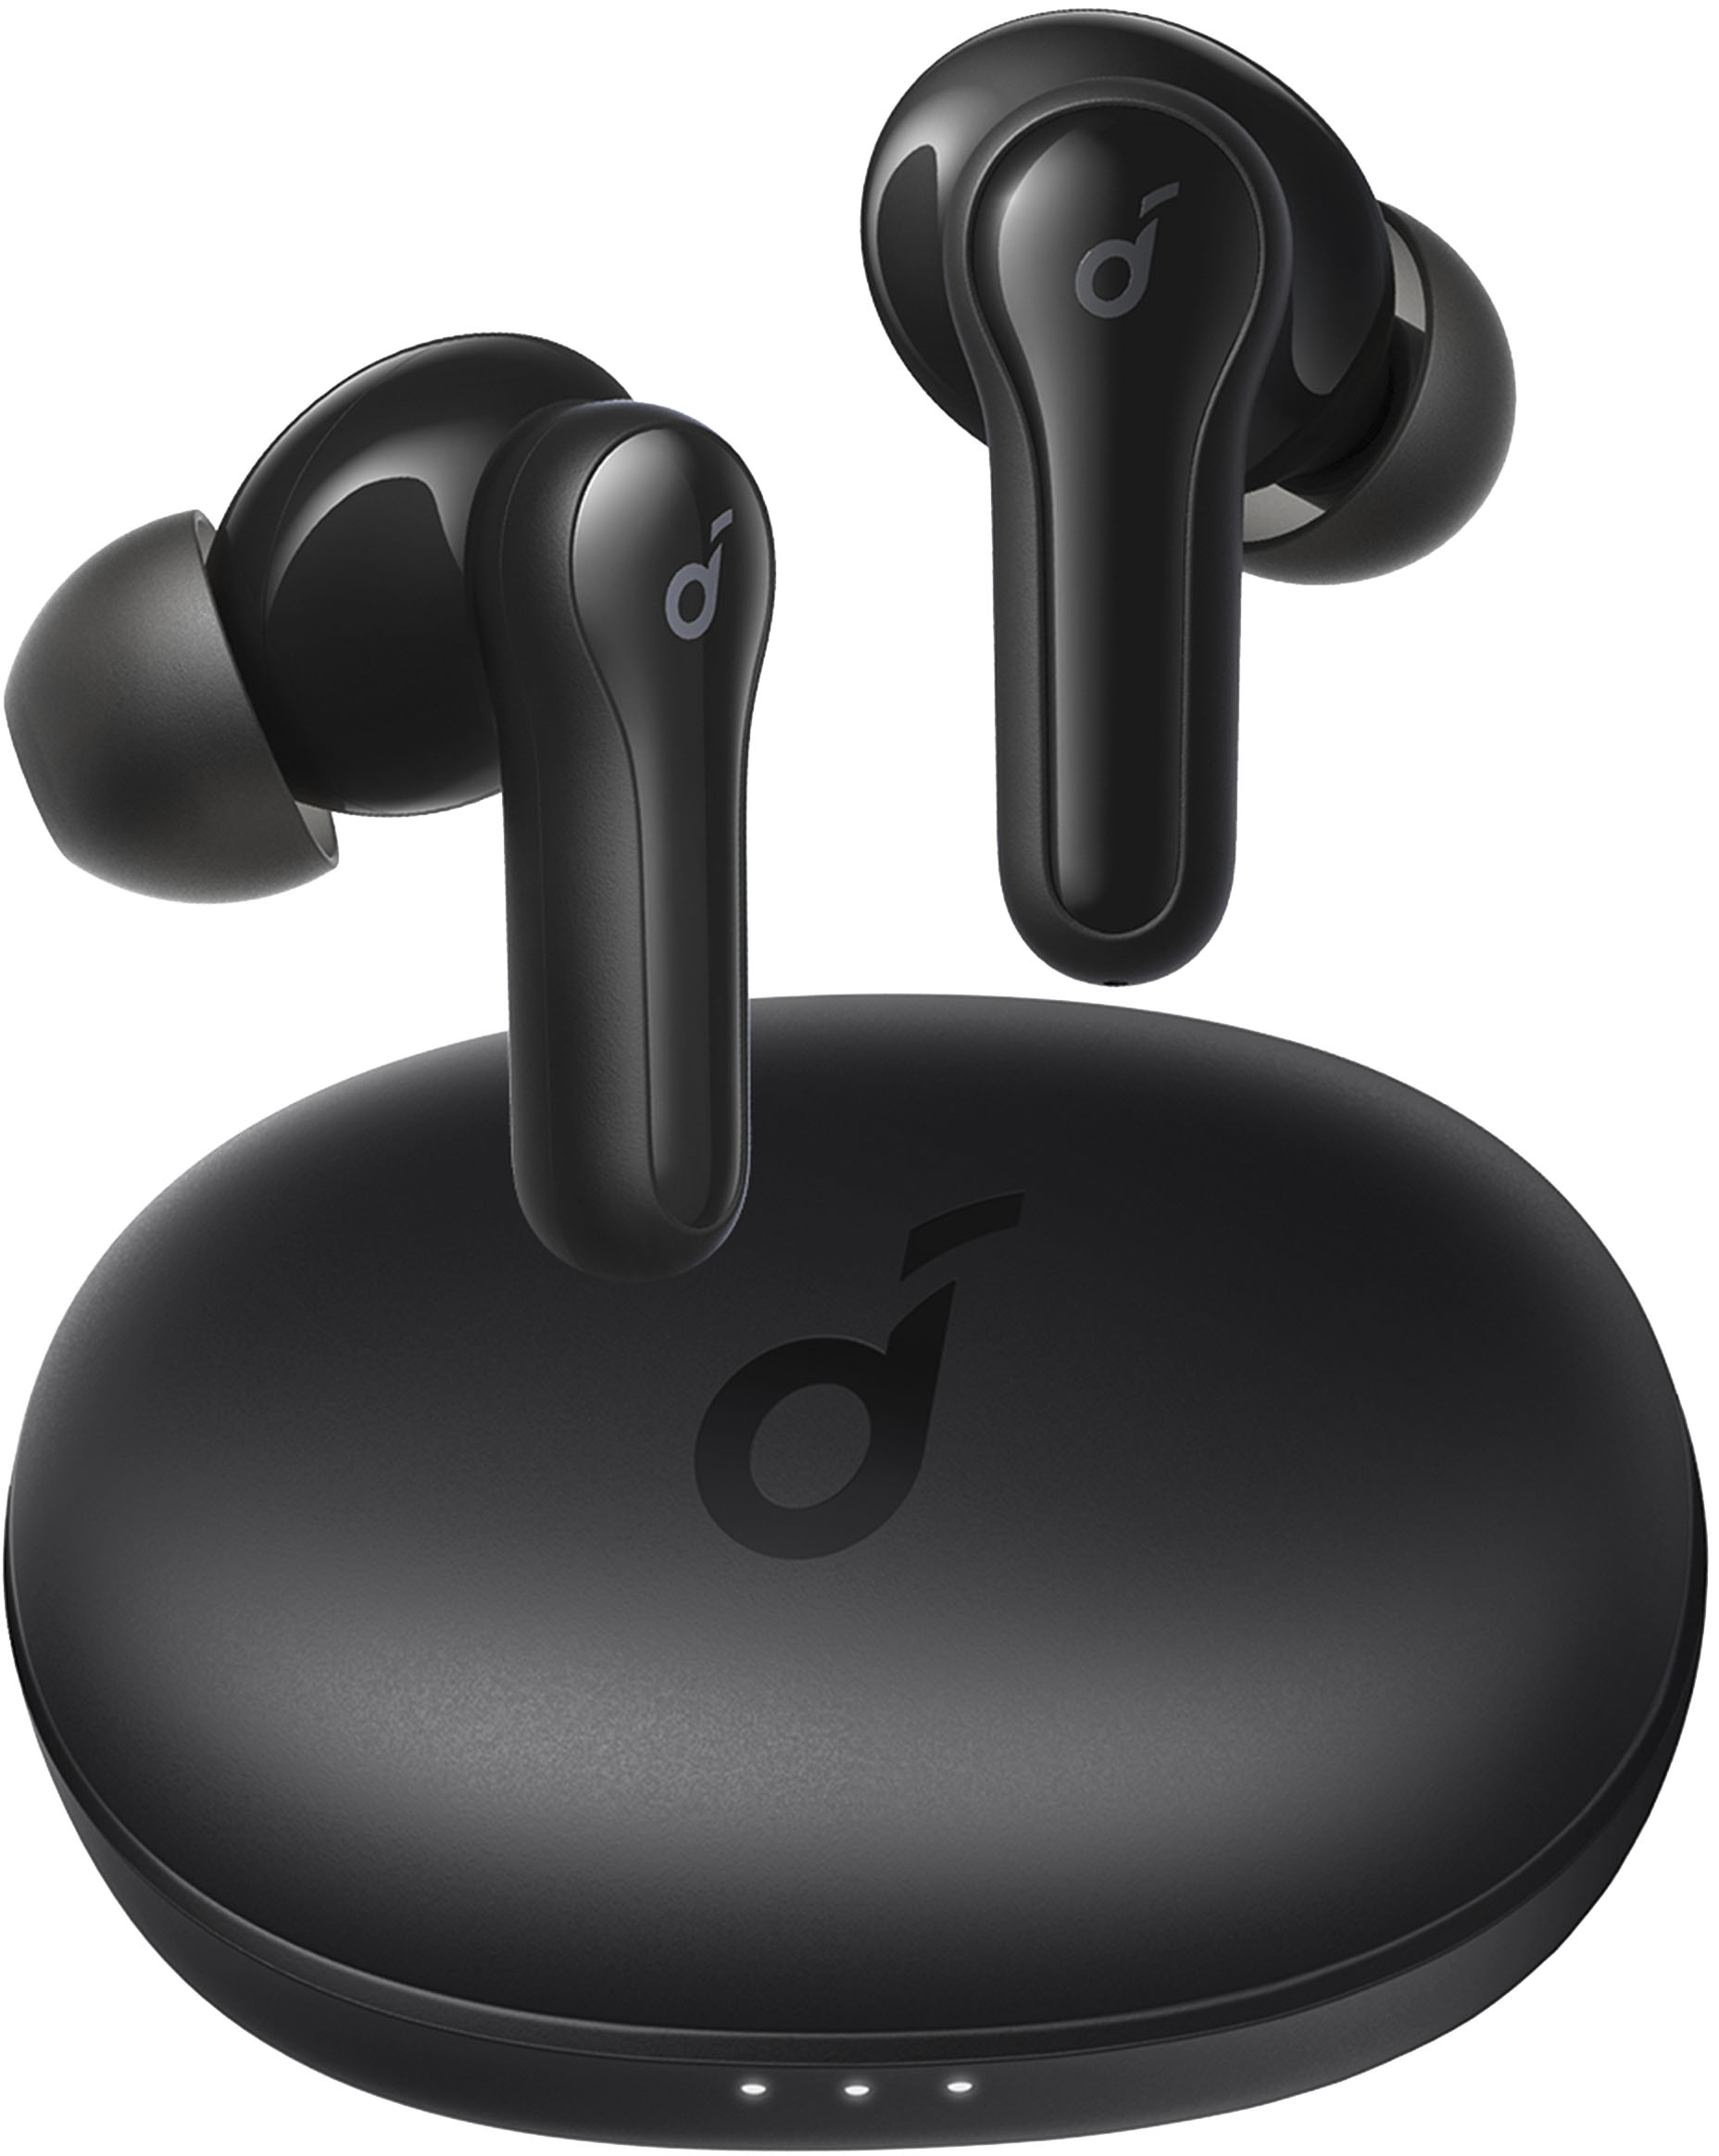 Soundcore - by Anker Life Note E Earbuds True Wireless In-Ear Headphones - Black $29.99 + Free Store Pick or Free Shipping on Orders $35+